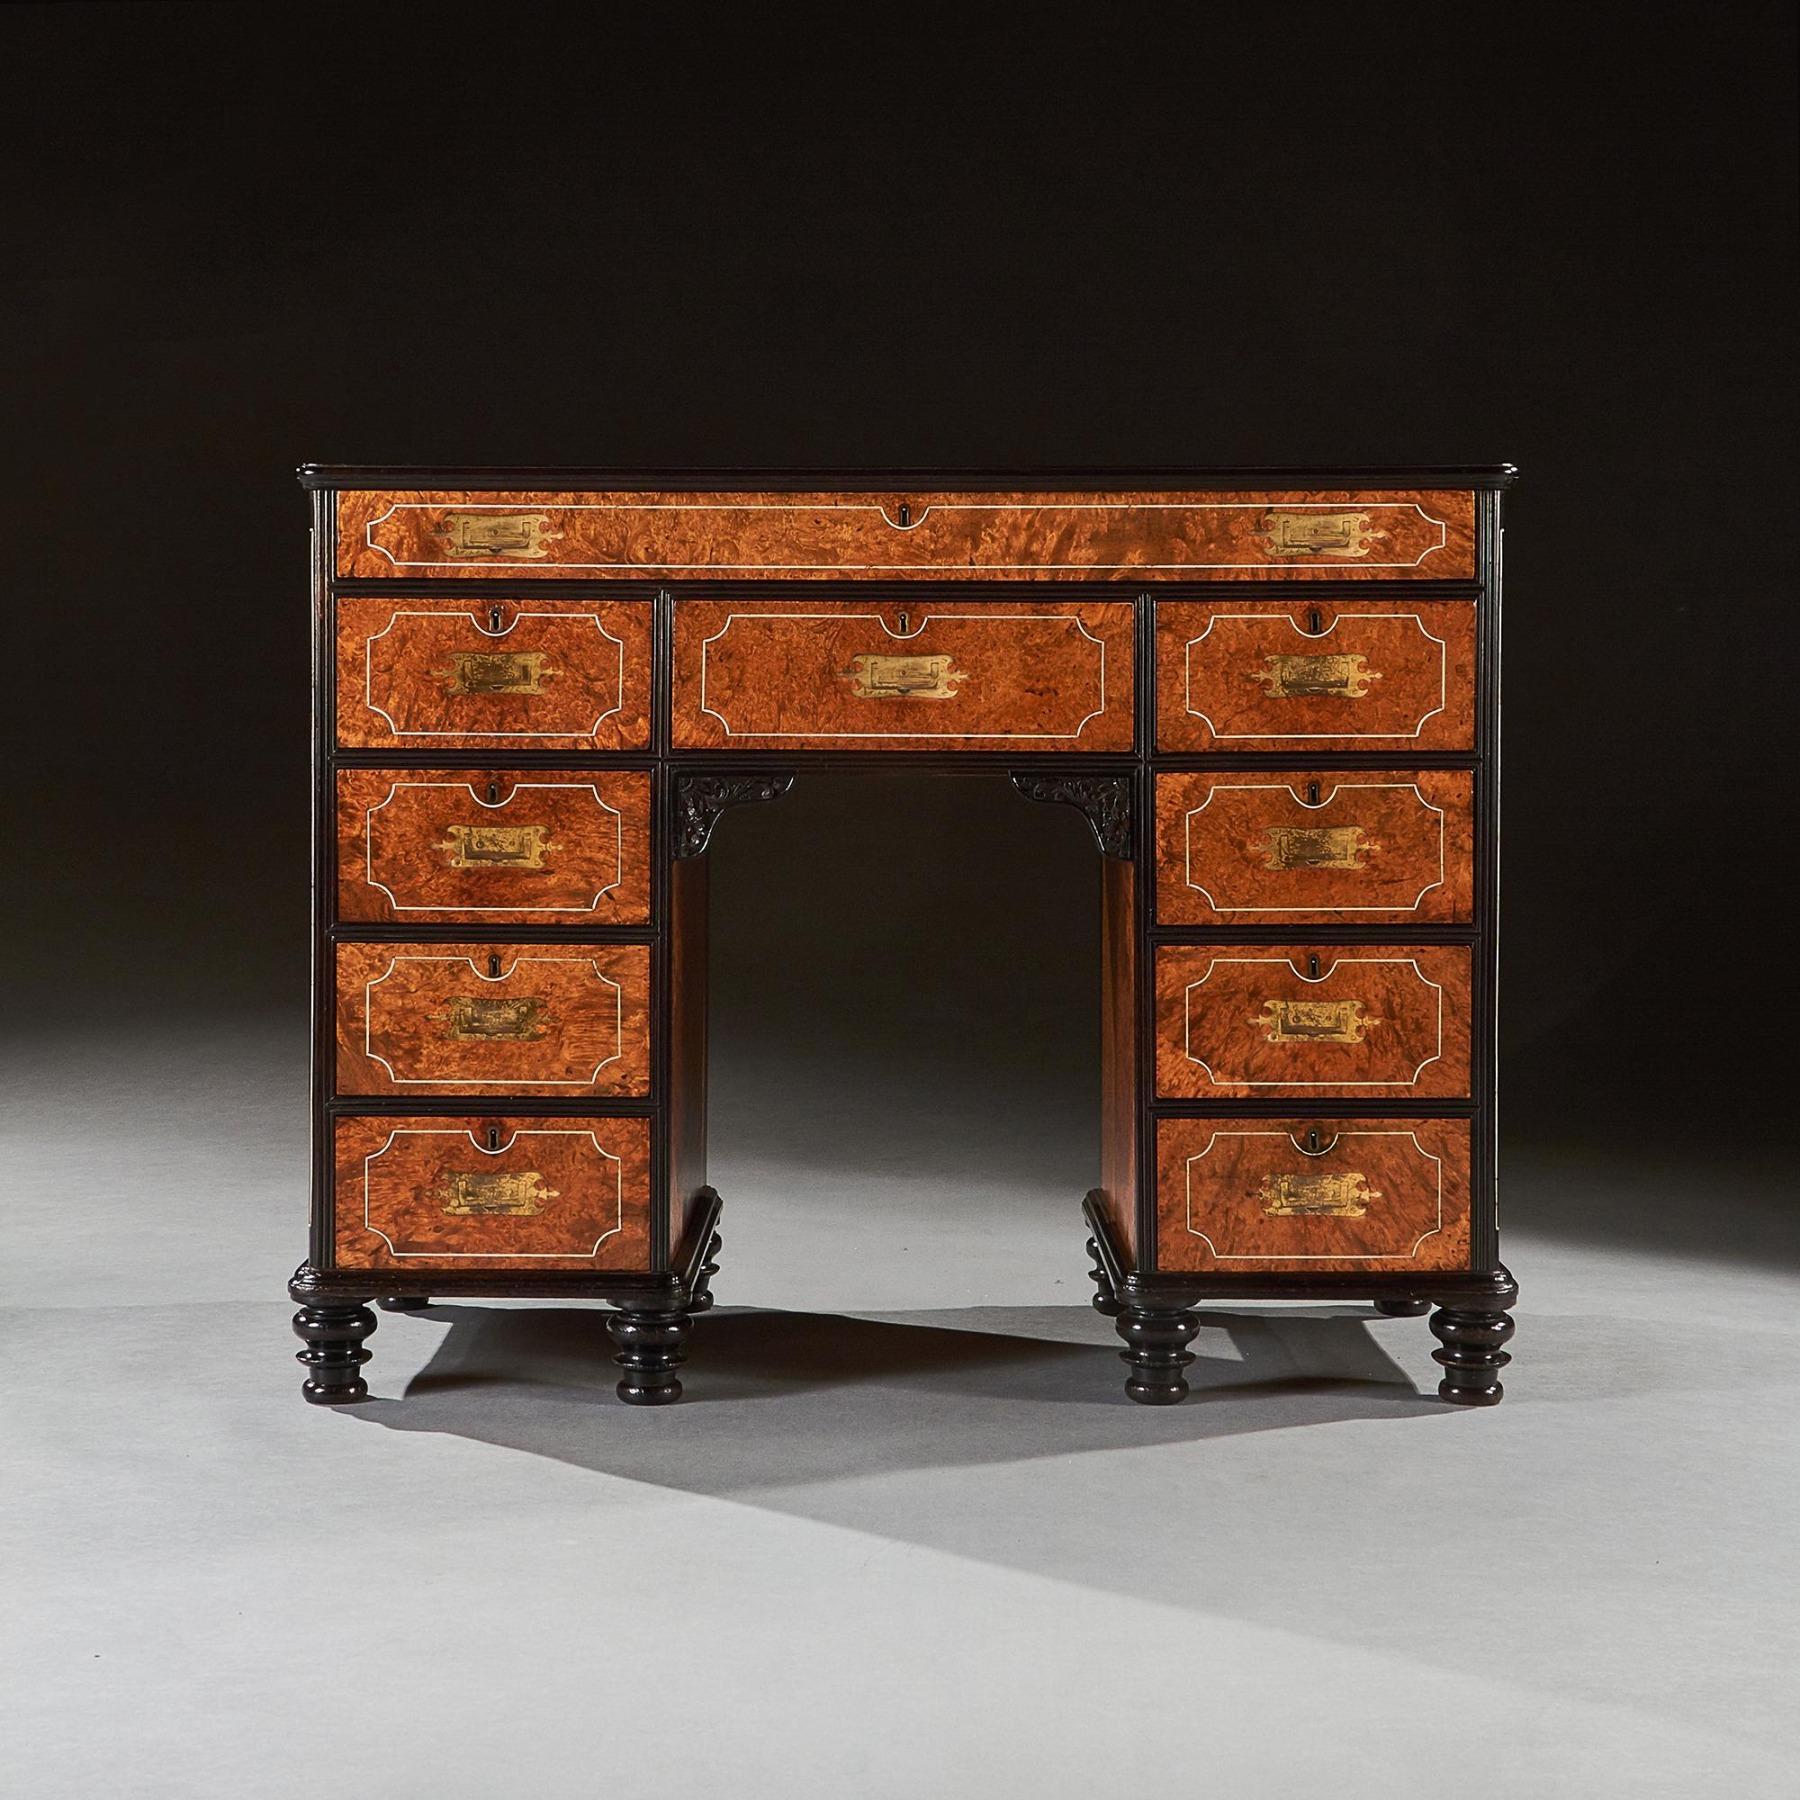 Rare and outstanding example of an early 19th century Anglo-Chinese export amboyna and ebony campaign kneehole desk retaining the original patina with wonderful colour. 



China circa 1830



One of the finest examples you will see,